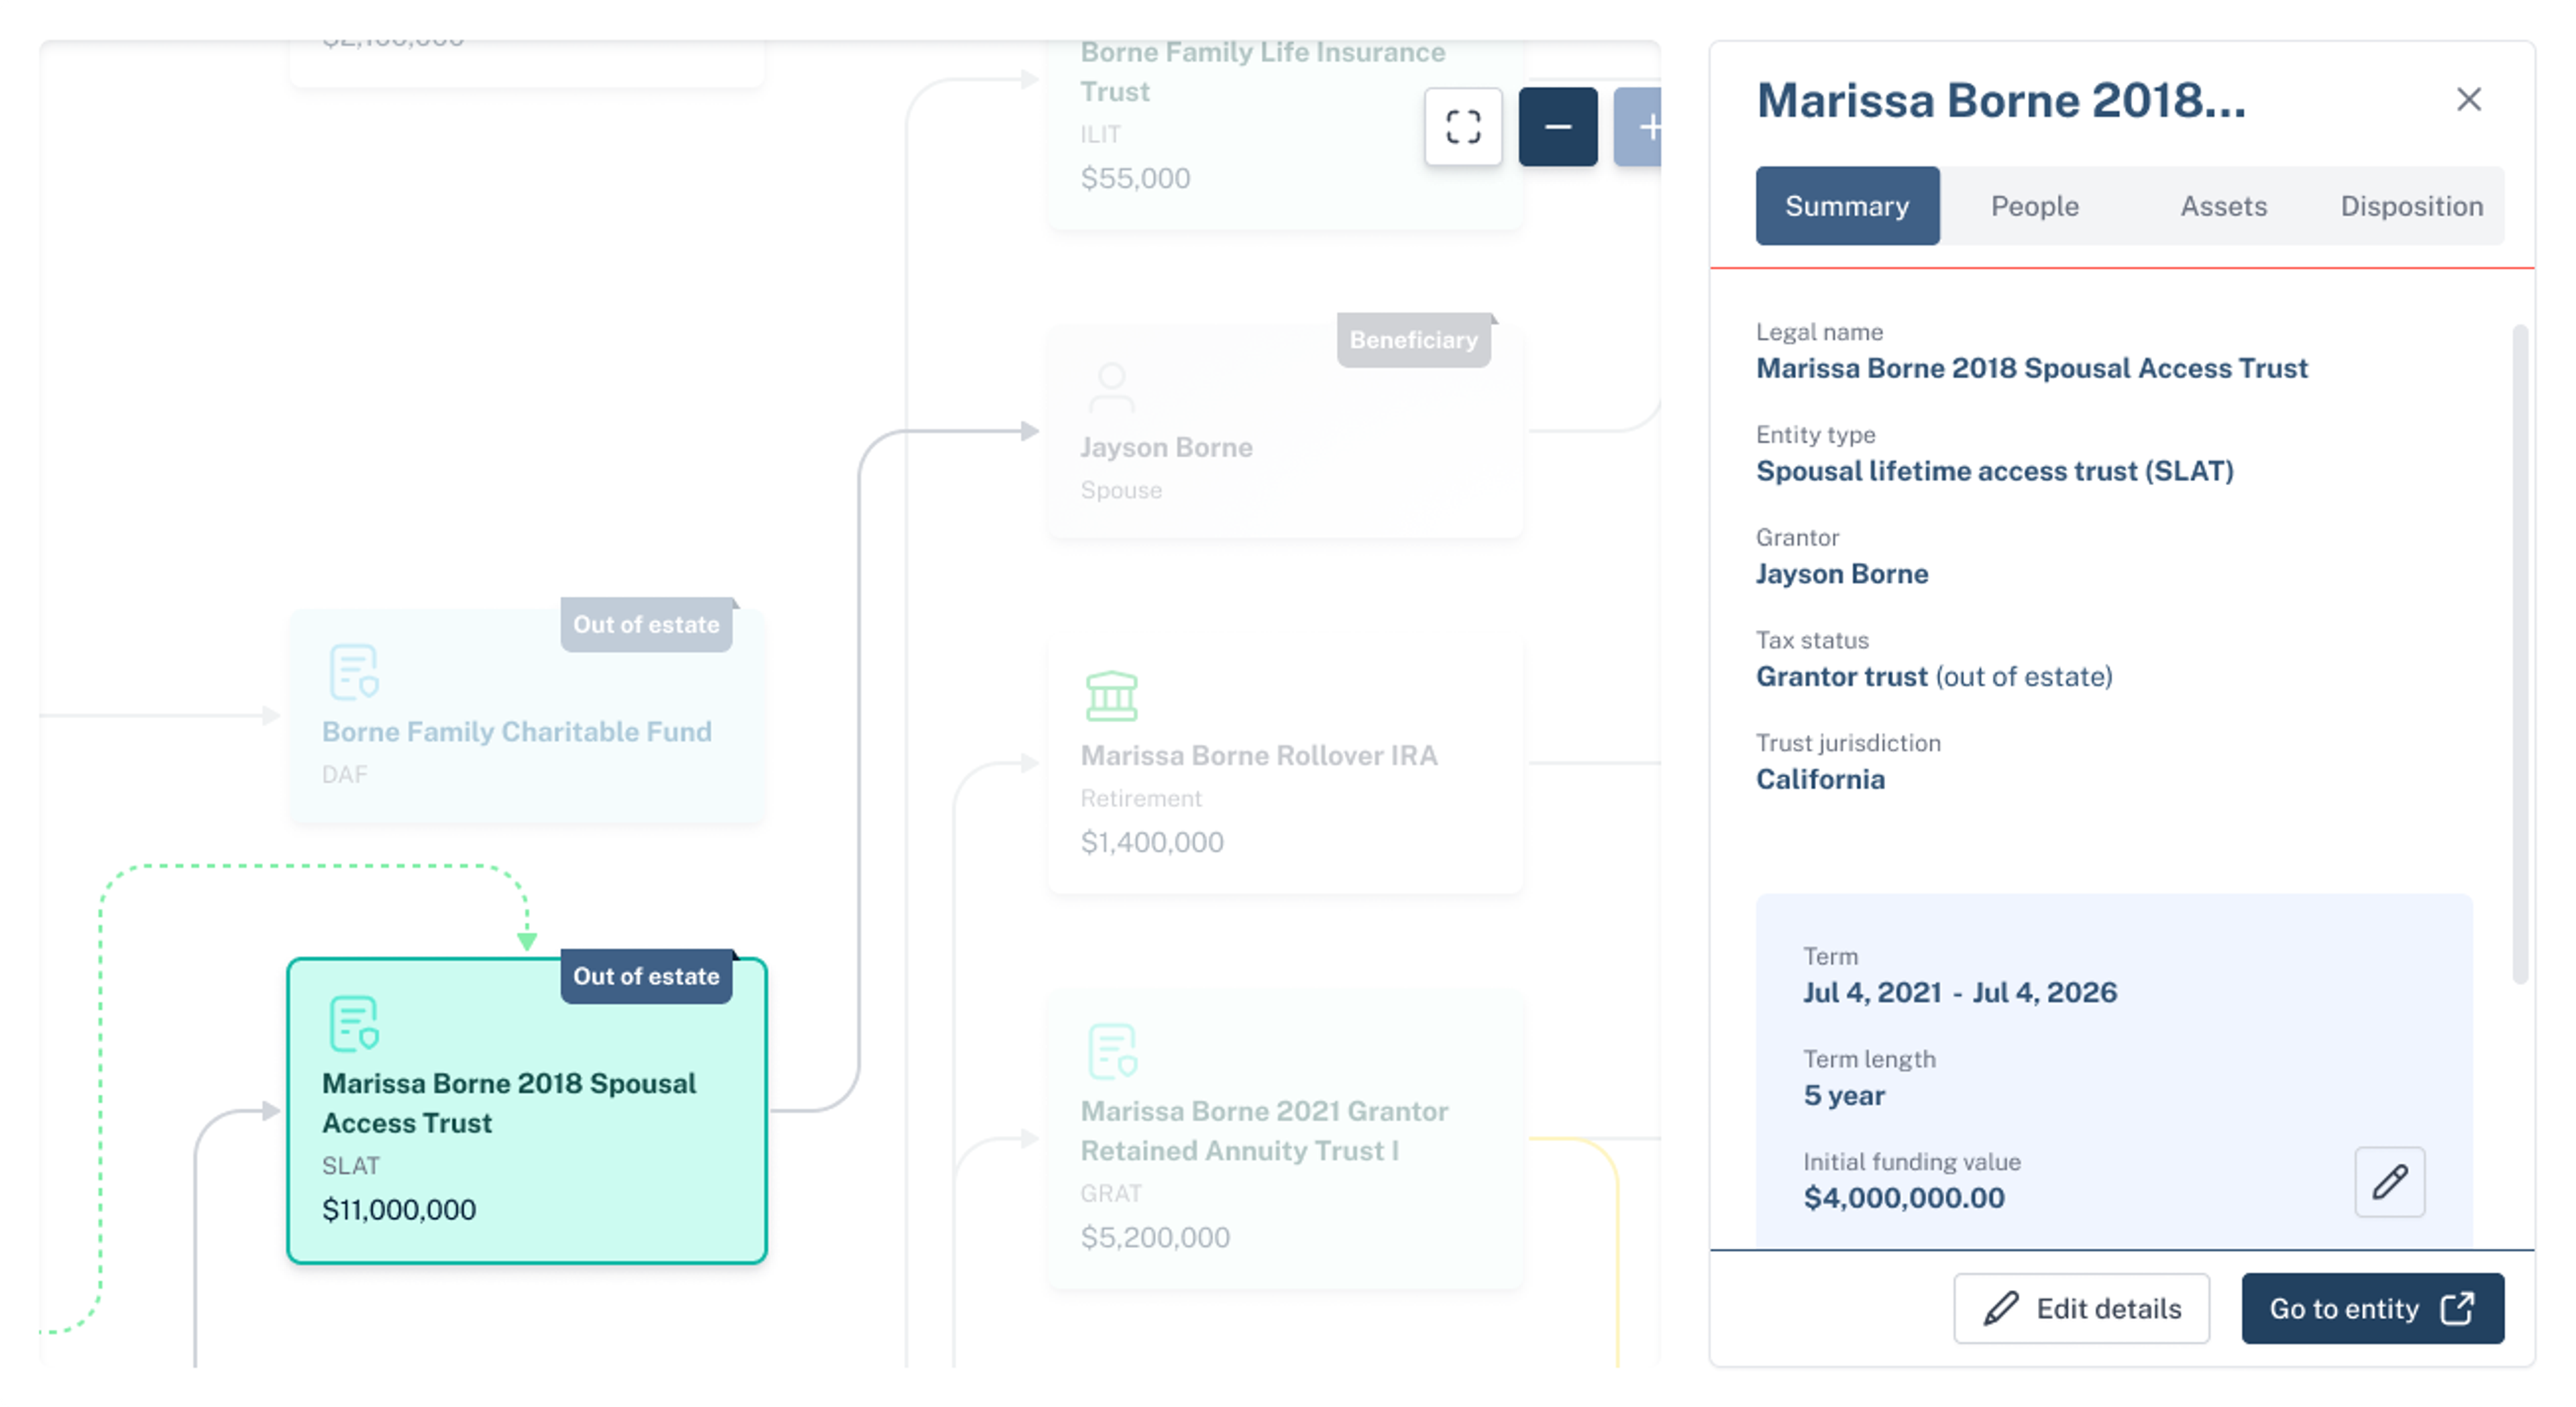 With Luminary’s Legacy Blueprint, you can see trust details in context with integrated data.